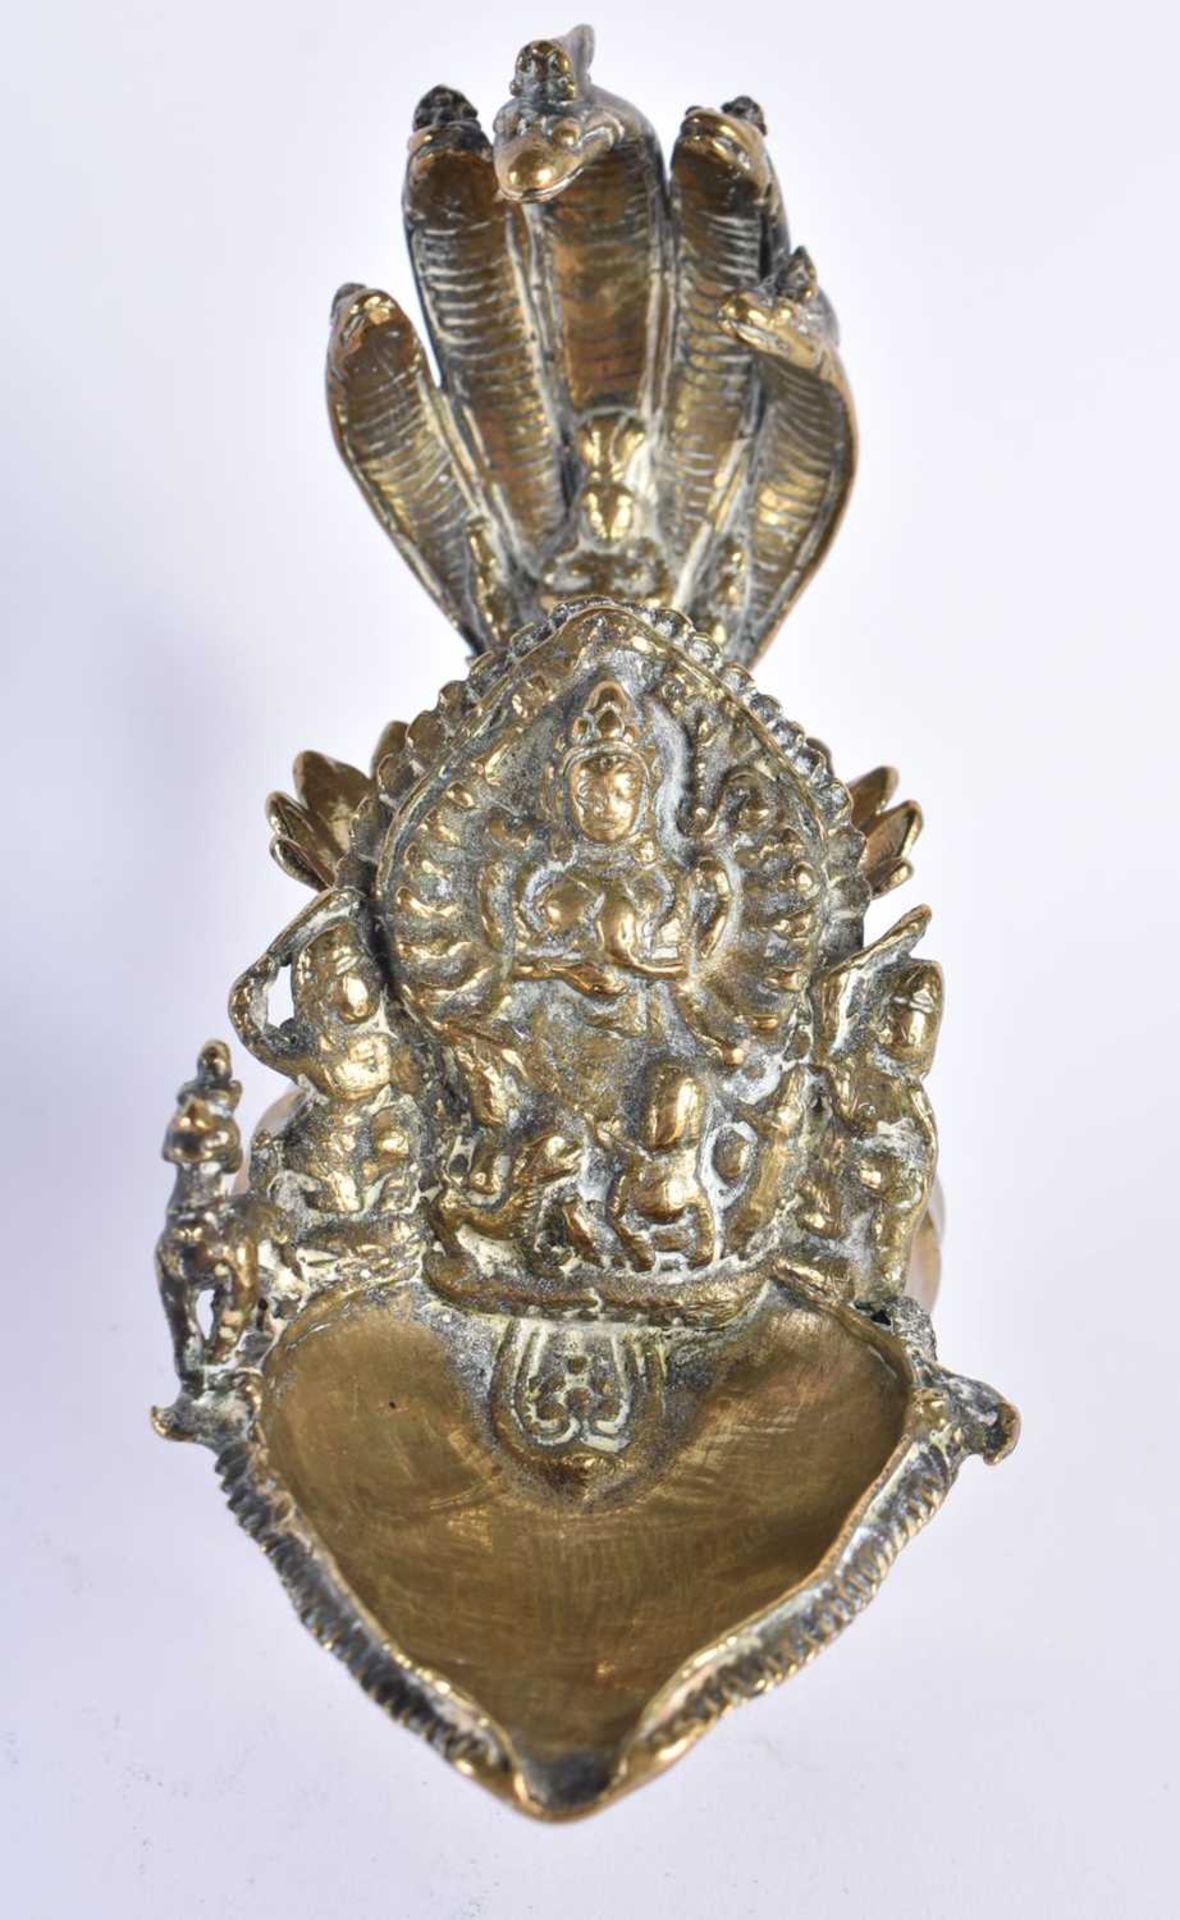 AN ANTIQUE INDIAN BRONZE HINDO DEITY VESSEL. 15 cm high. - Image 2 of 6